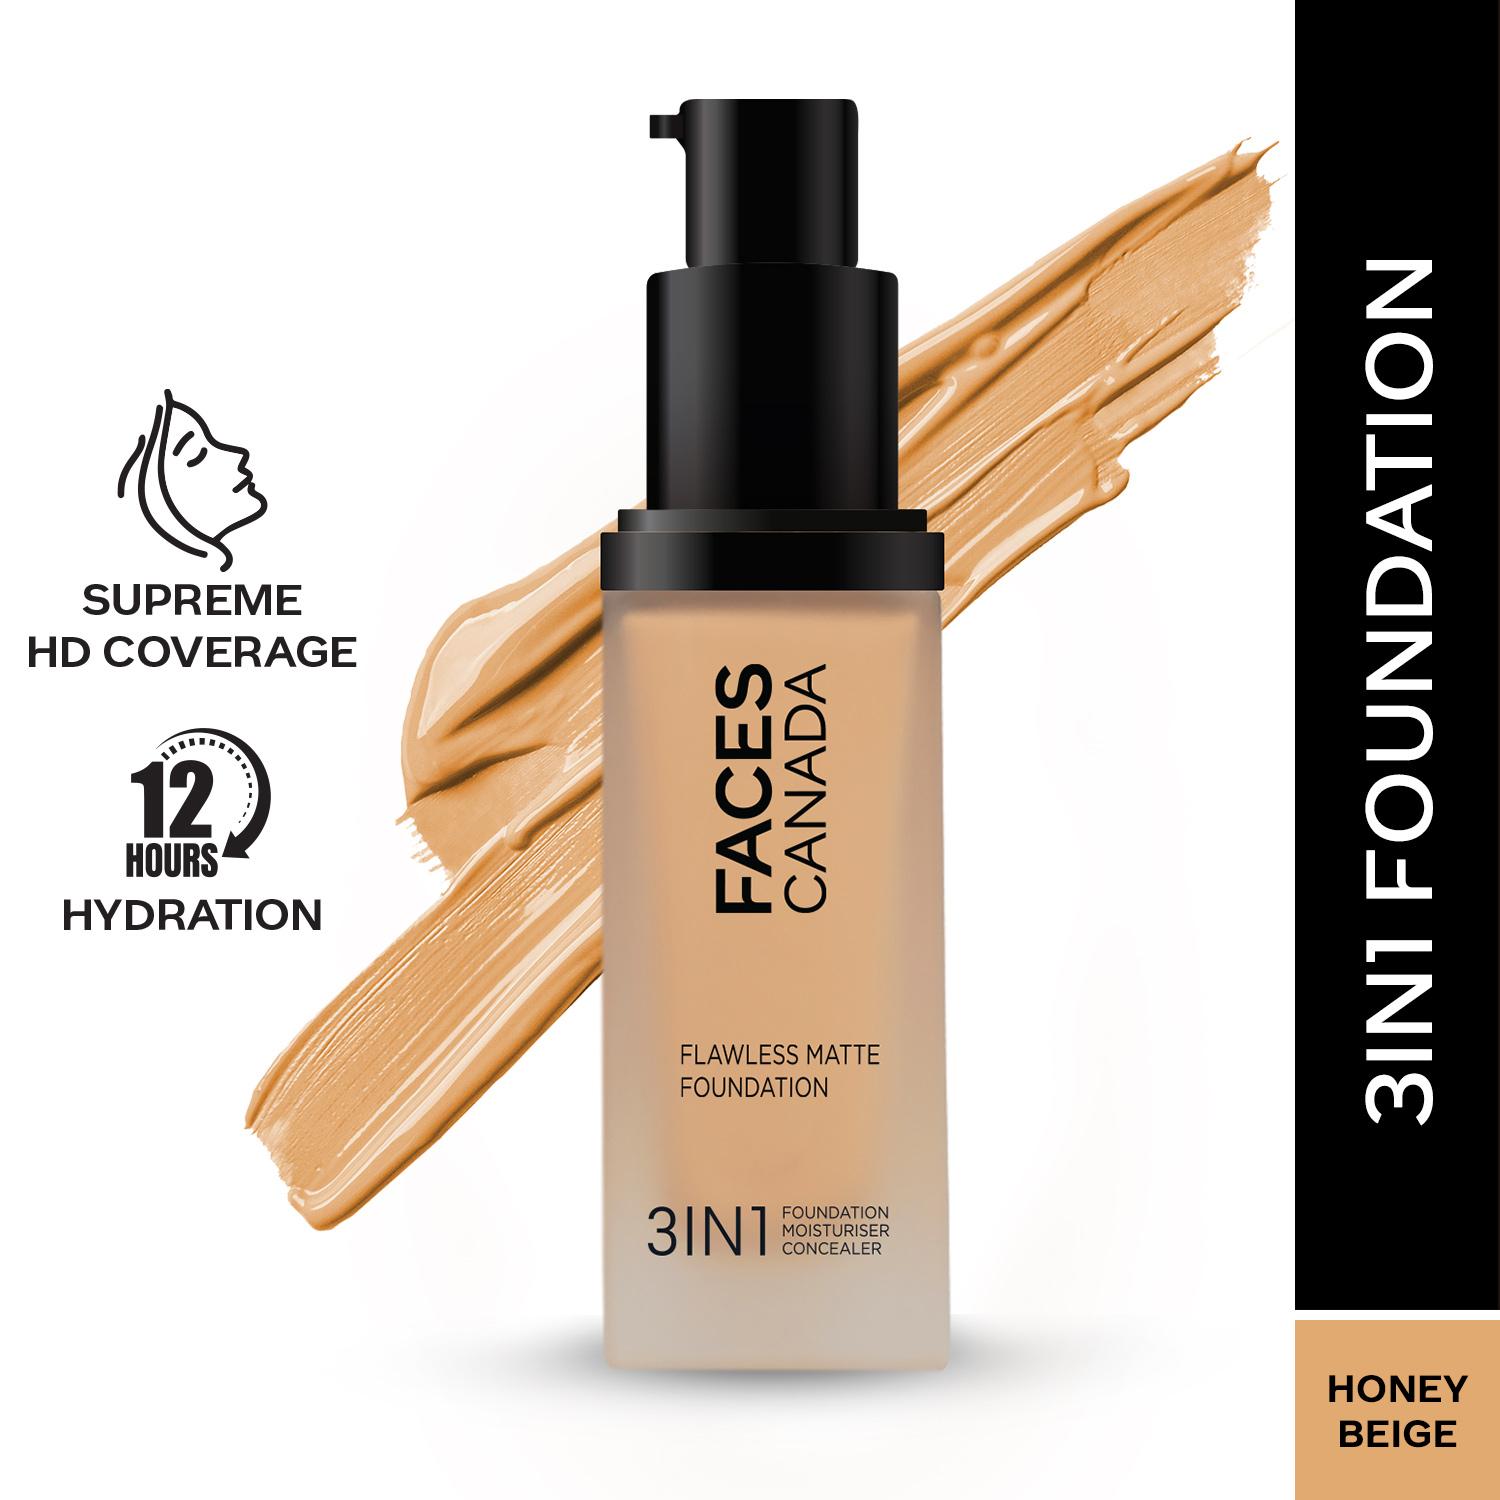 Faces Canada | Faces Canada 3-In-1 Flawless Matte Foundation SPF 18 - 031 Honey Beige (30ml)